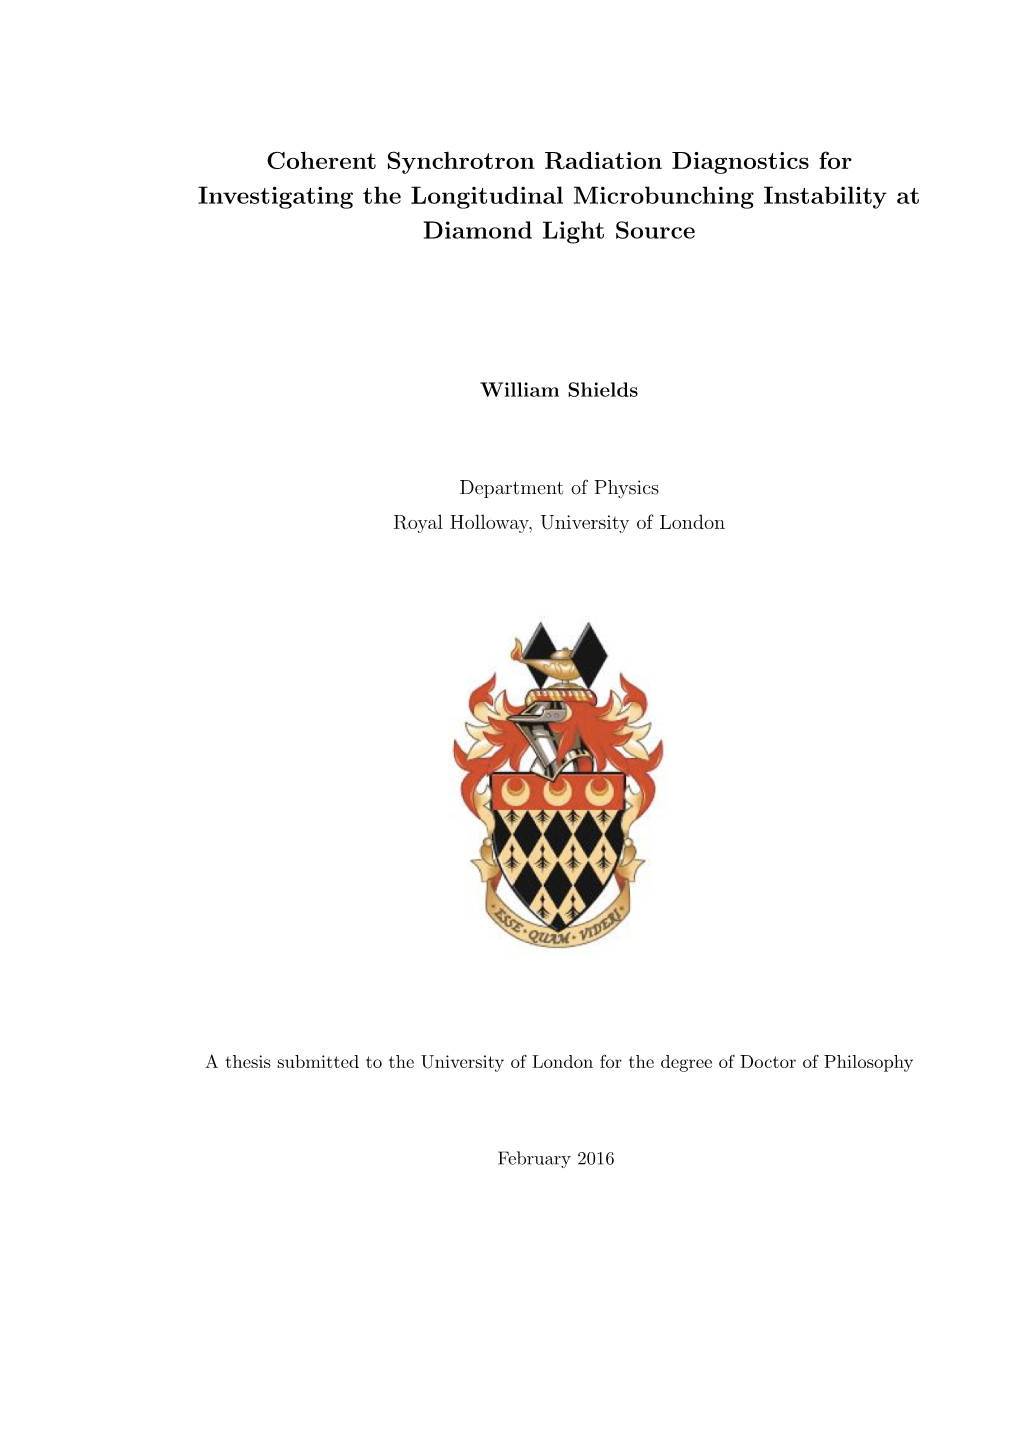 William Shields Thesis